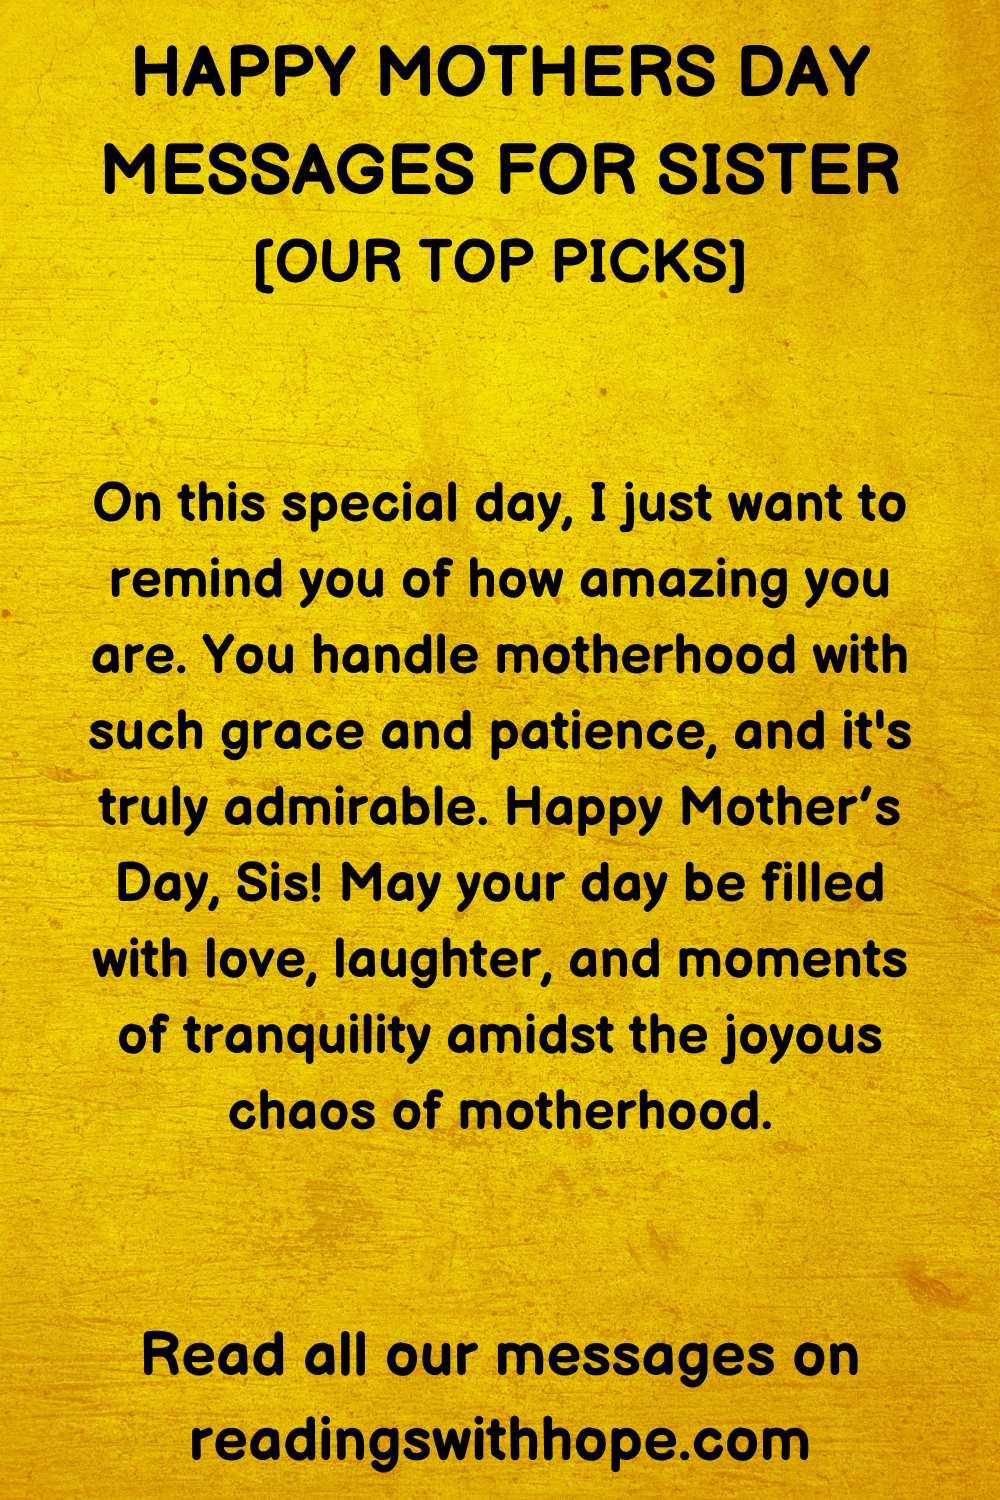 Happy Mothers Day Messages for Sister
